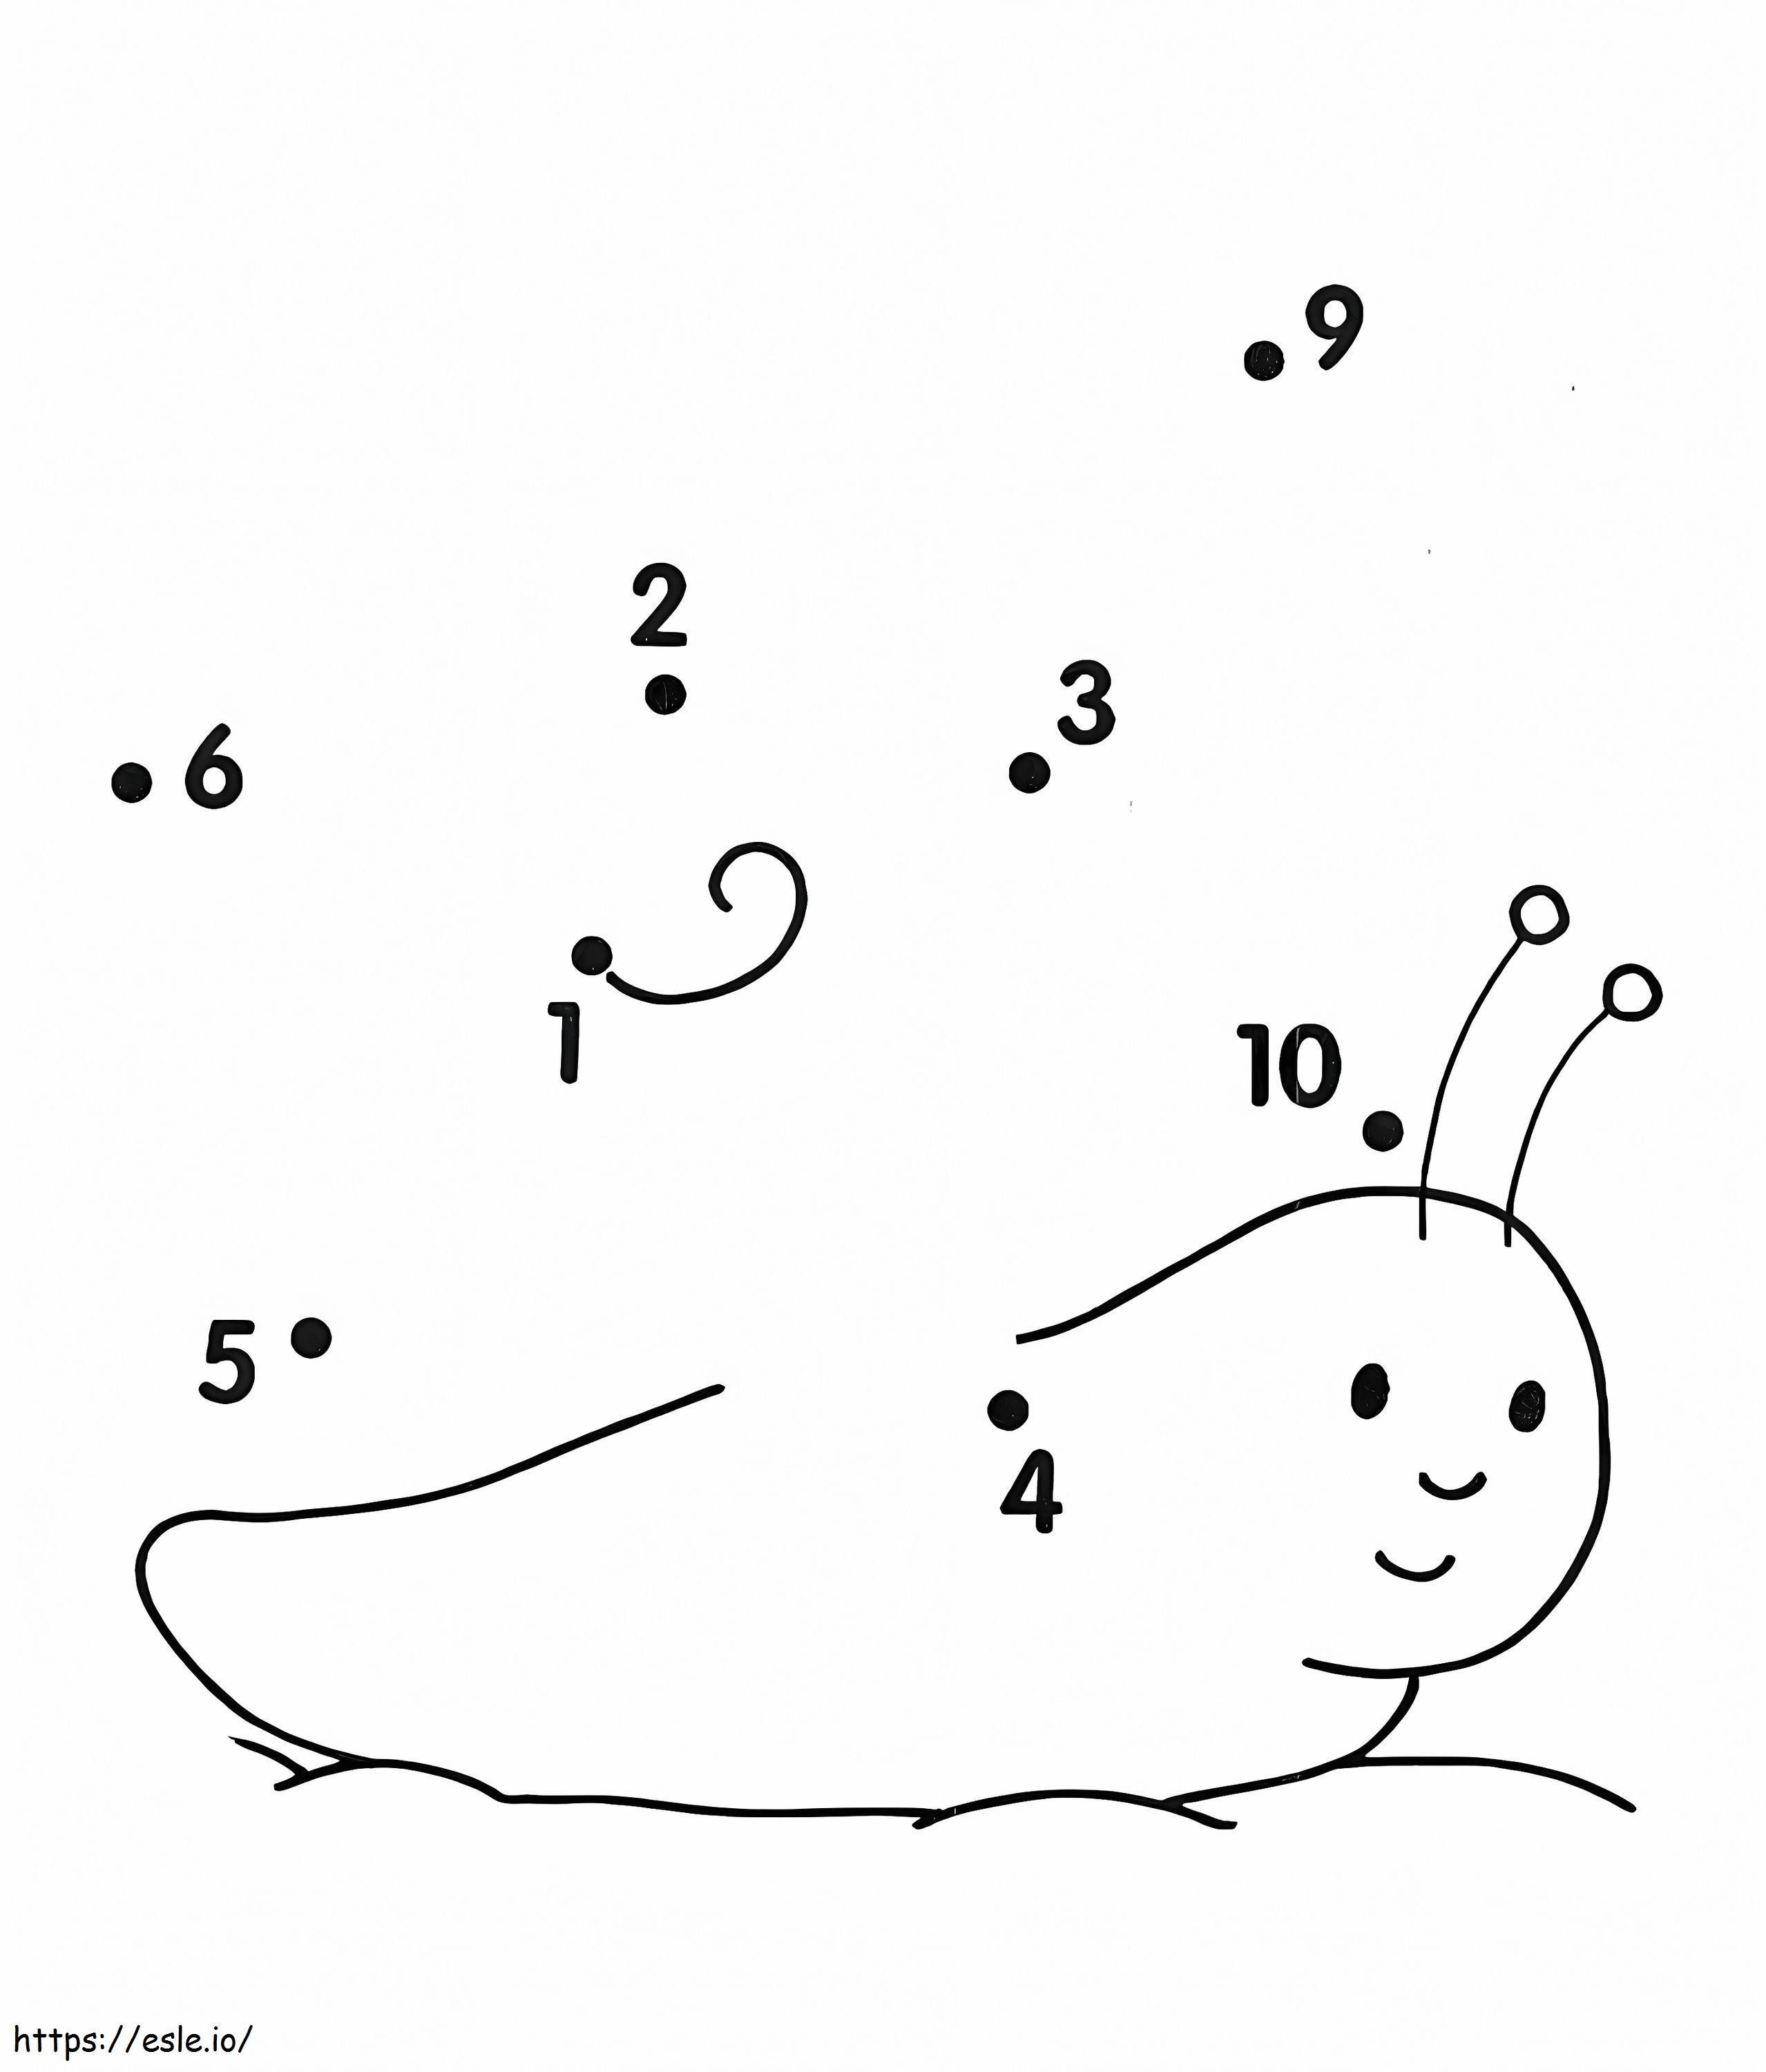 D Snail Dot To Worksheets Numbers 1 20 coloring page